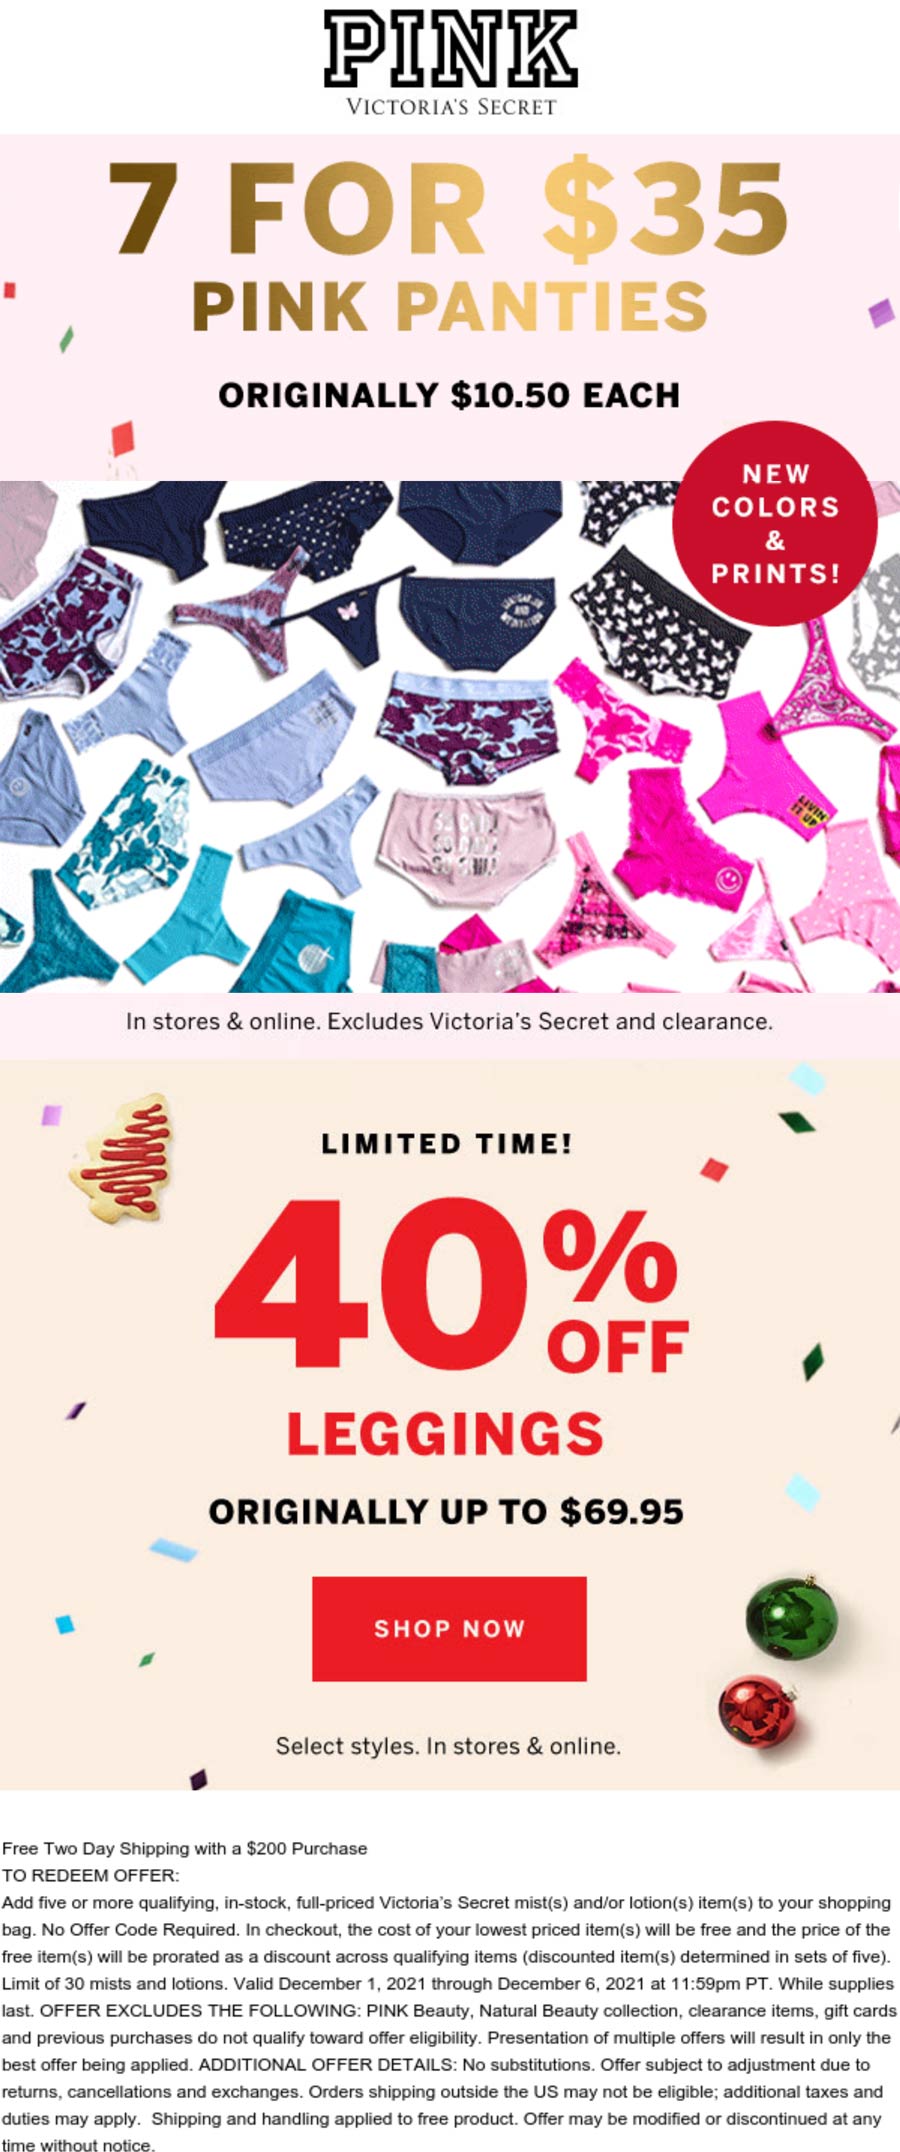 PINK stores Coupon  40% off leggings at Victorias Secret PINK, ditto online #pink 